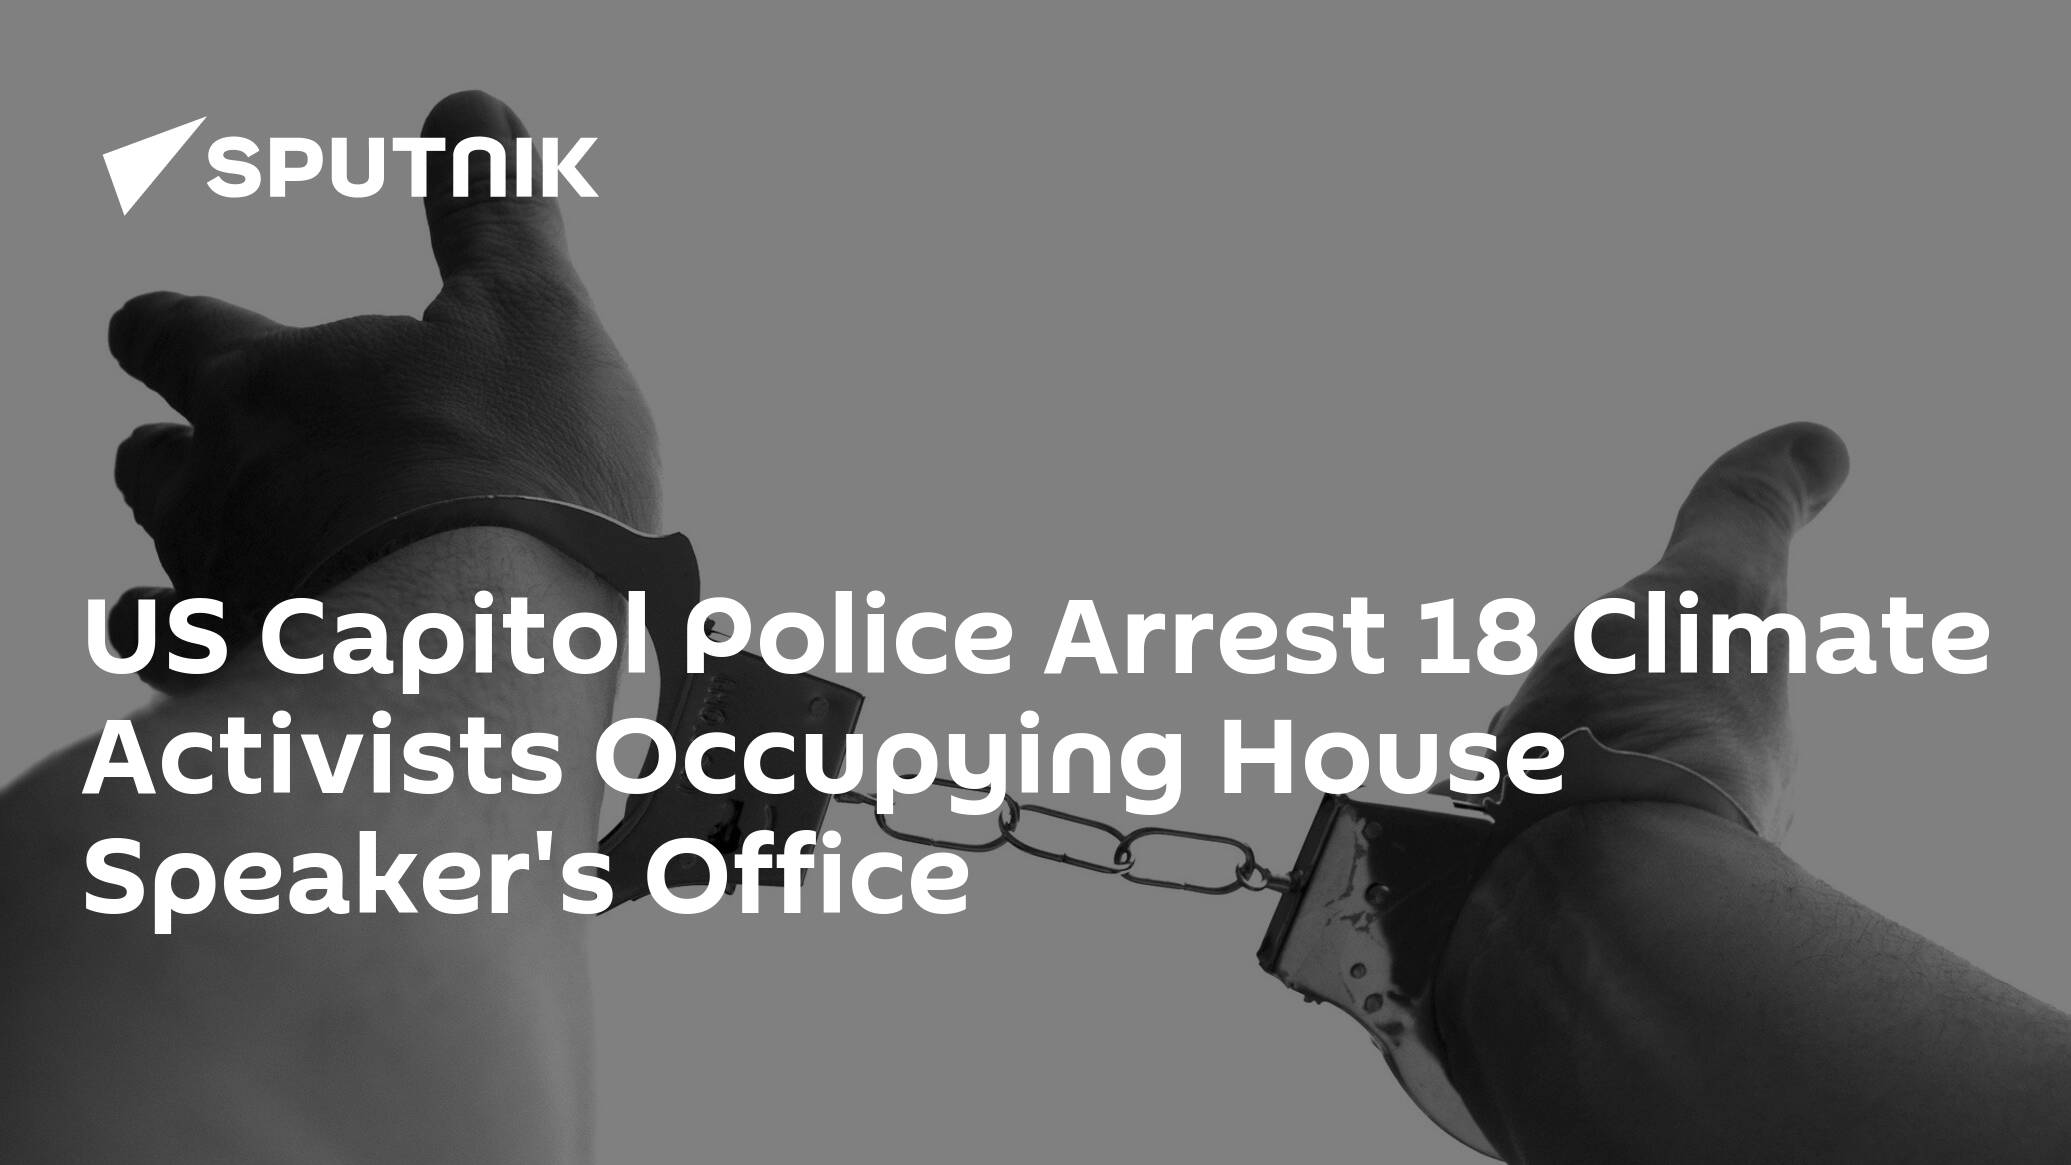 US Capitol Police Arrest 18 Climate Activists Occupying House Speaker's Office